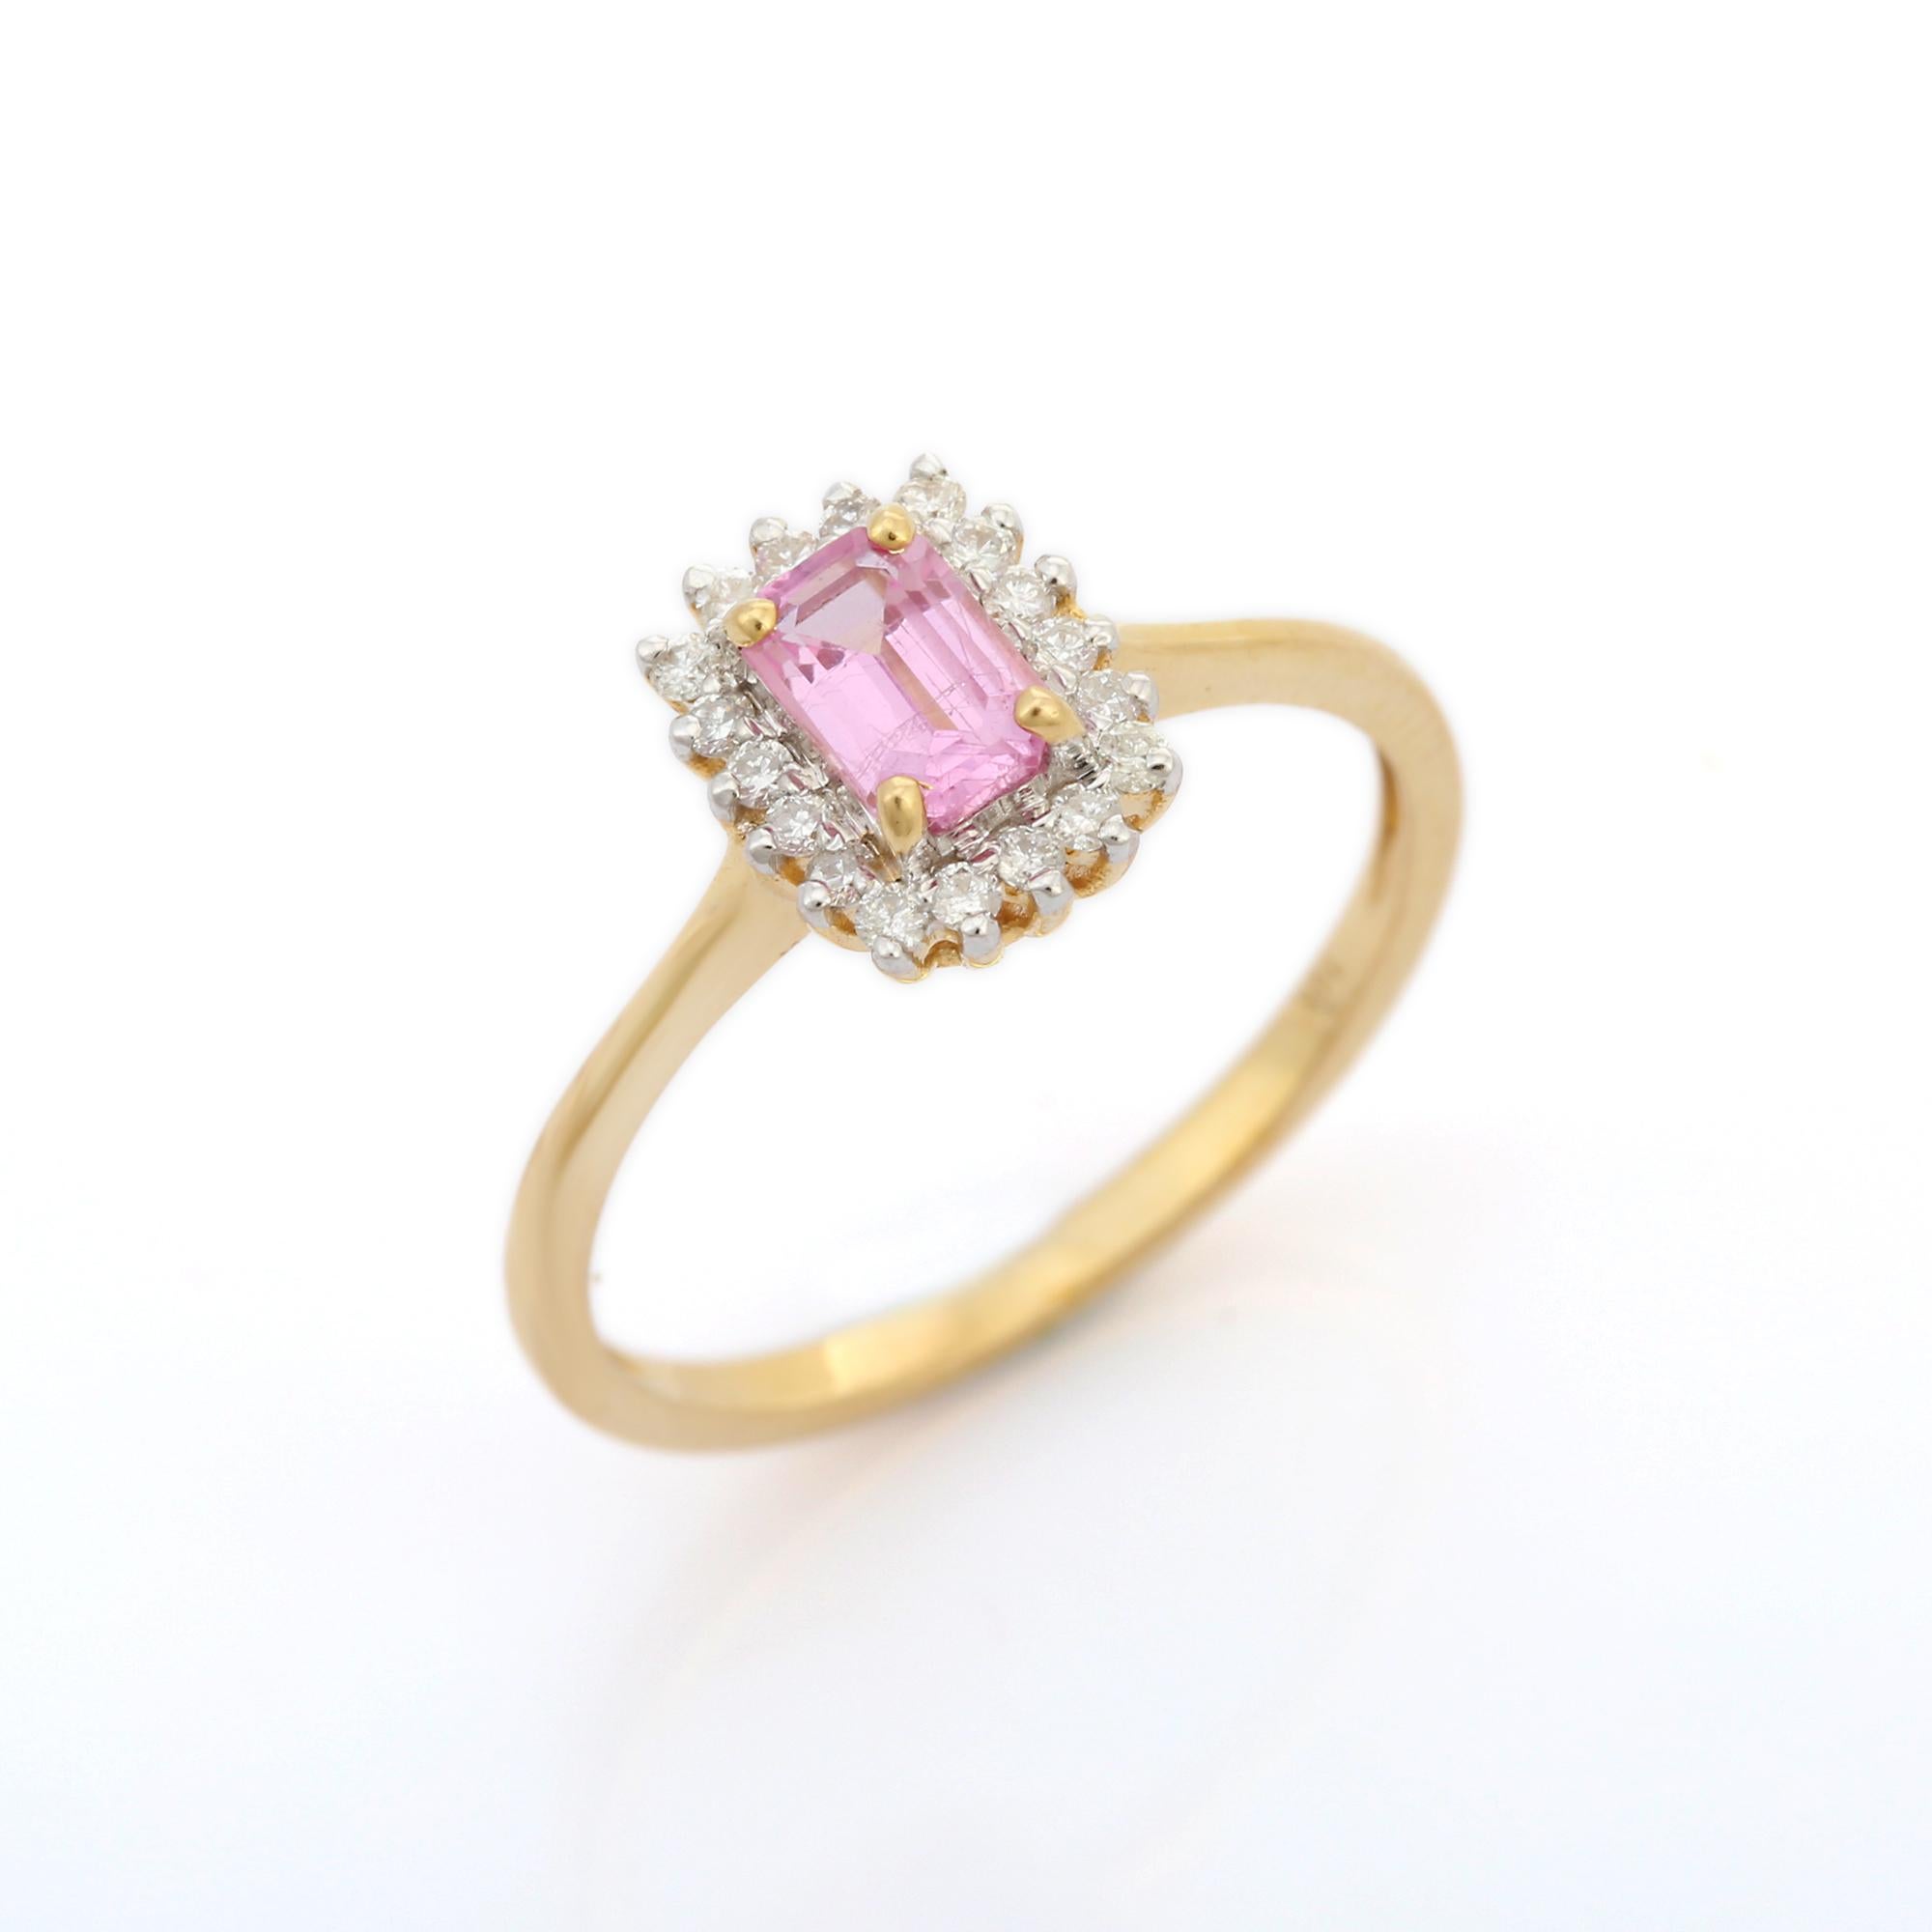 For Sale:  Minimalist Pink Sapphire Halo Diamond Bridal Ring in 14K Solid Yellow Gold 5